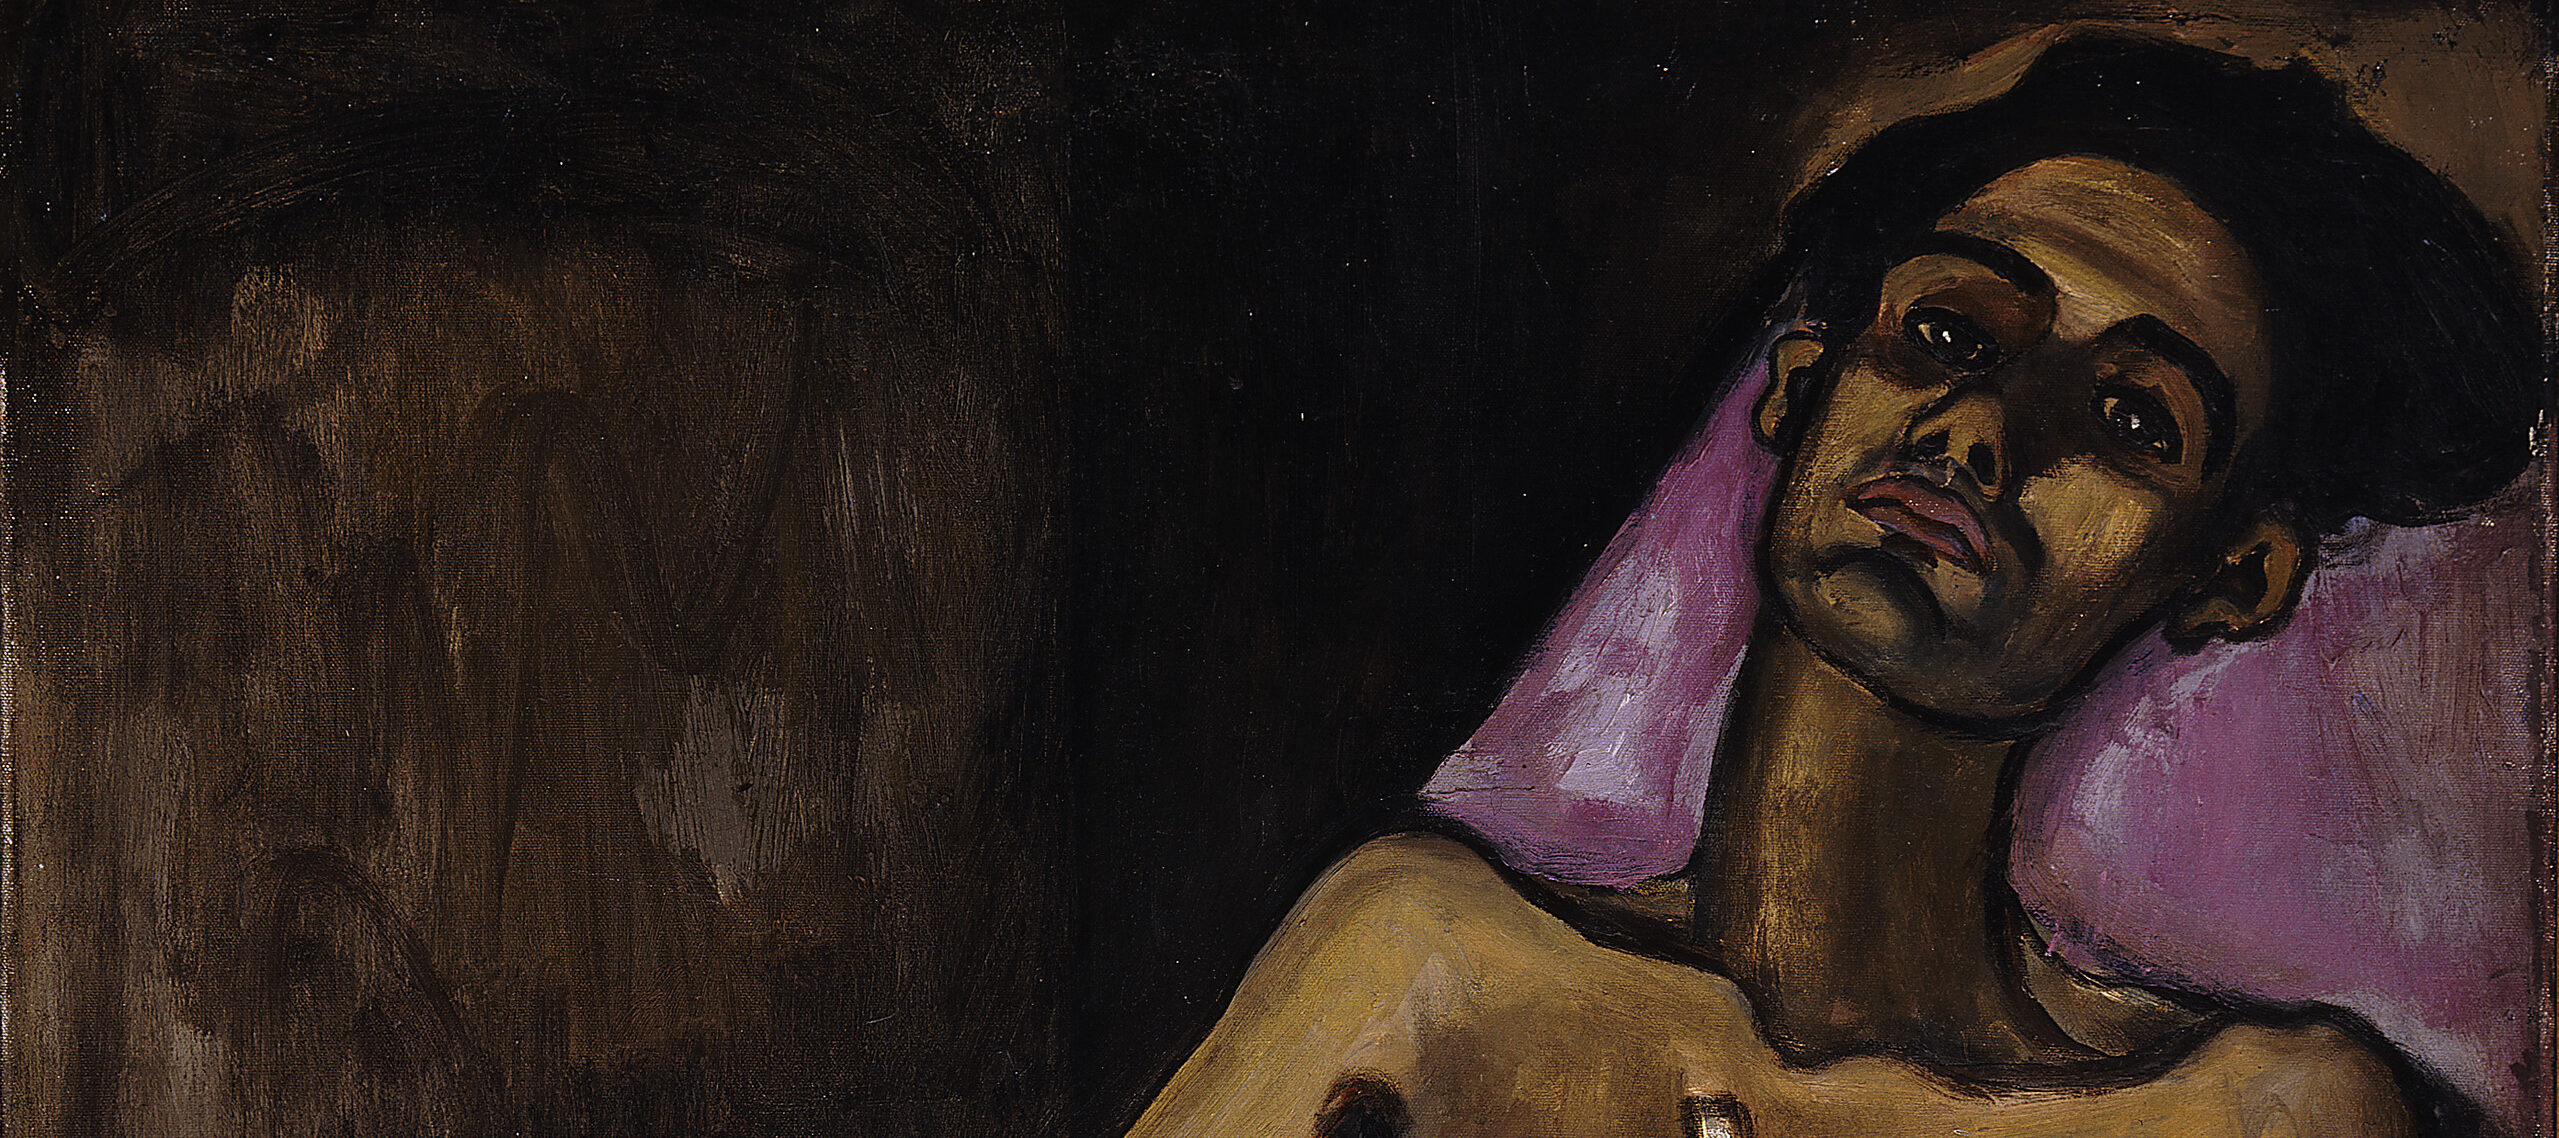 A sick man with medium skin tone lies on a bed with purple bedding and stares out with a dignified expression. The left side of his chest is misshapen and covered with a white bandage. Thick outlines define his body and highlights on his arms and face accentuate his frail frame.